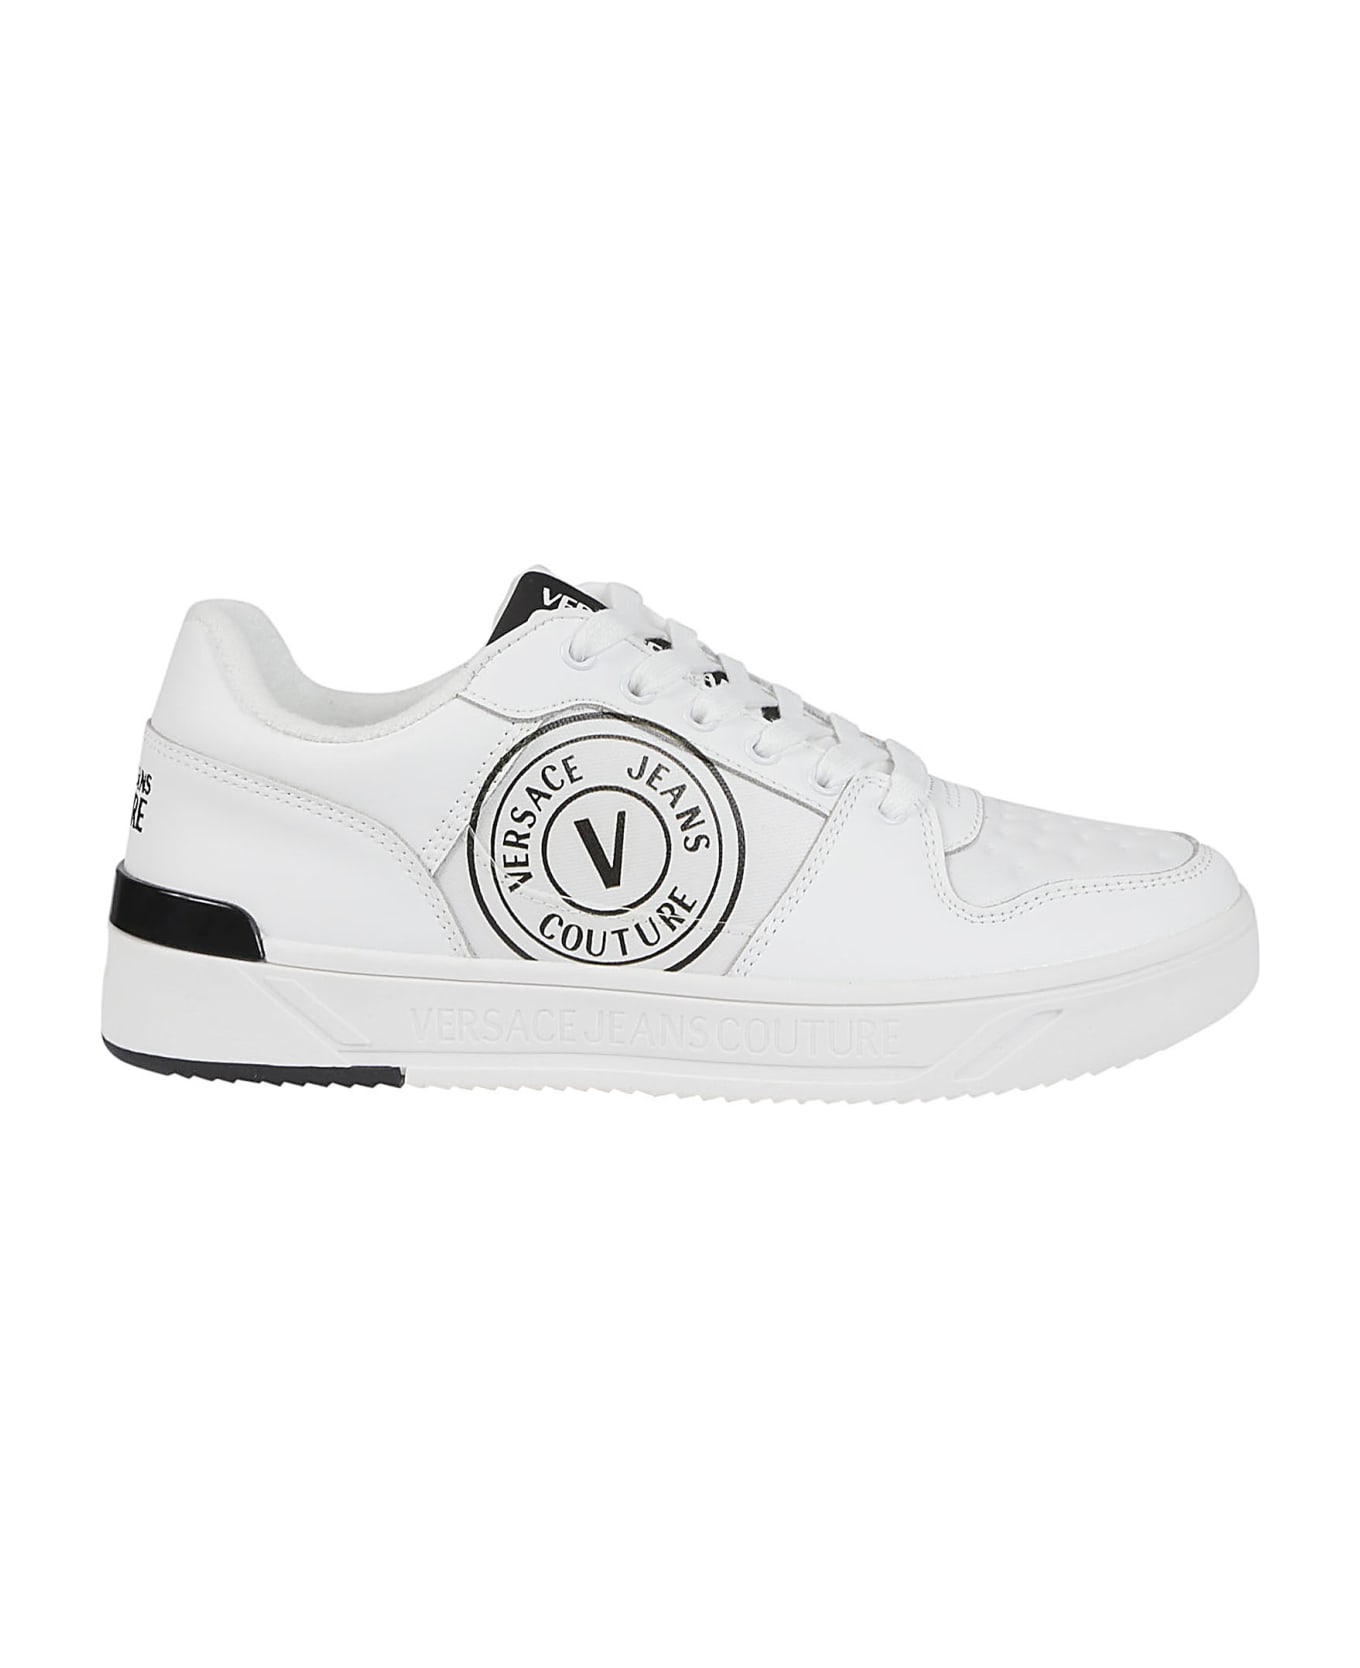 Versace Jeans Couture Starlight Sj1 Sneakers - White スニーカー